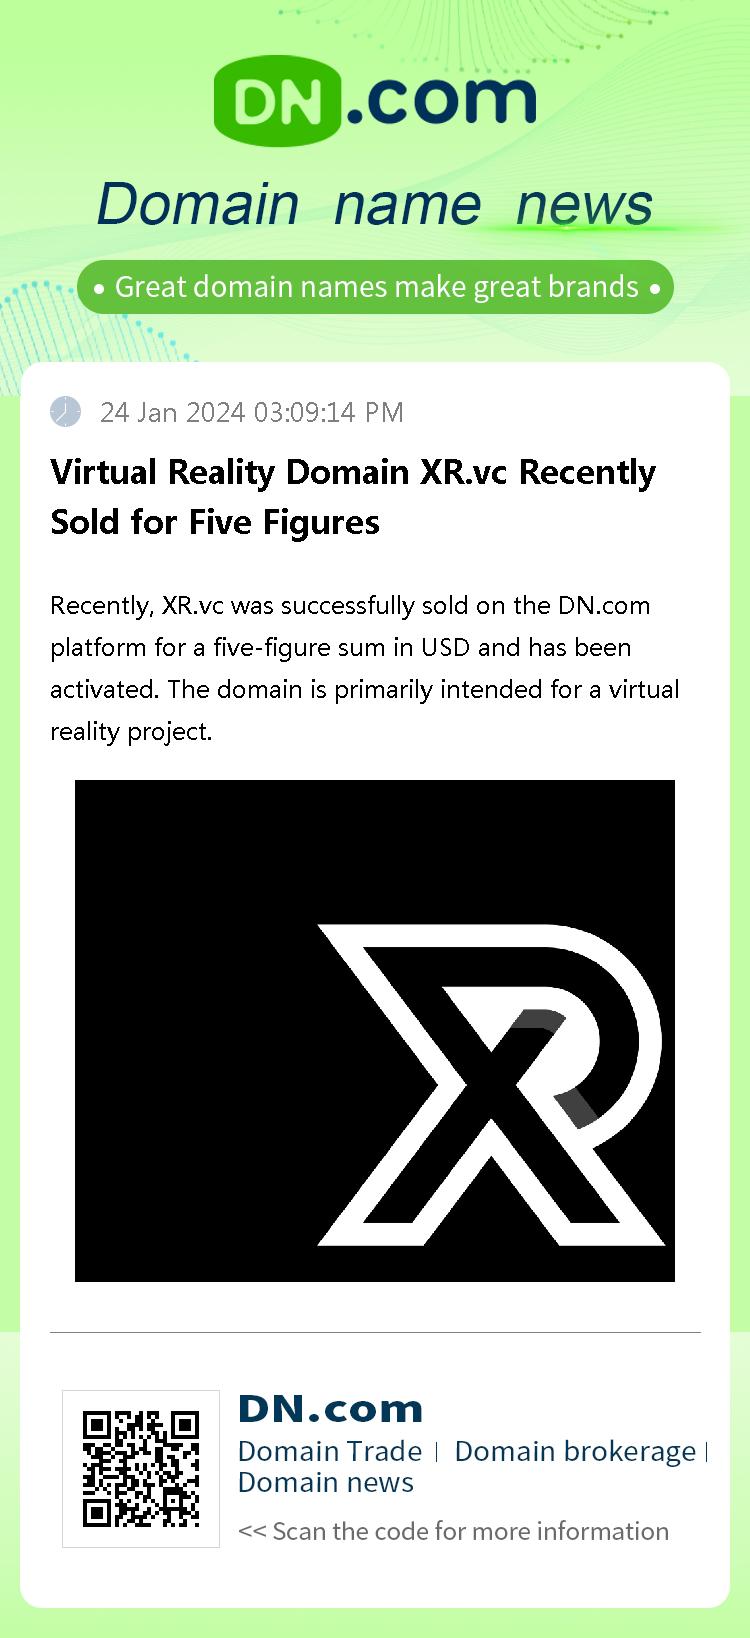 Virtual Reality Domain XR.vc Recently Sold for Five Figures